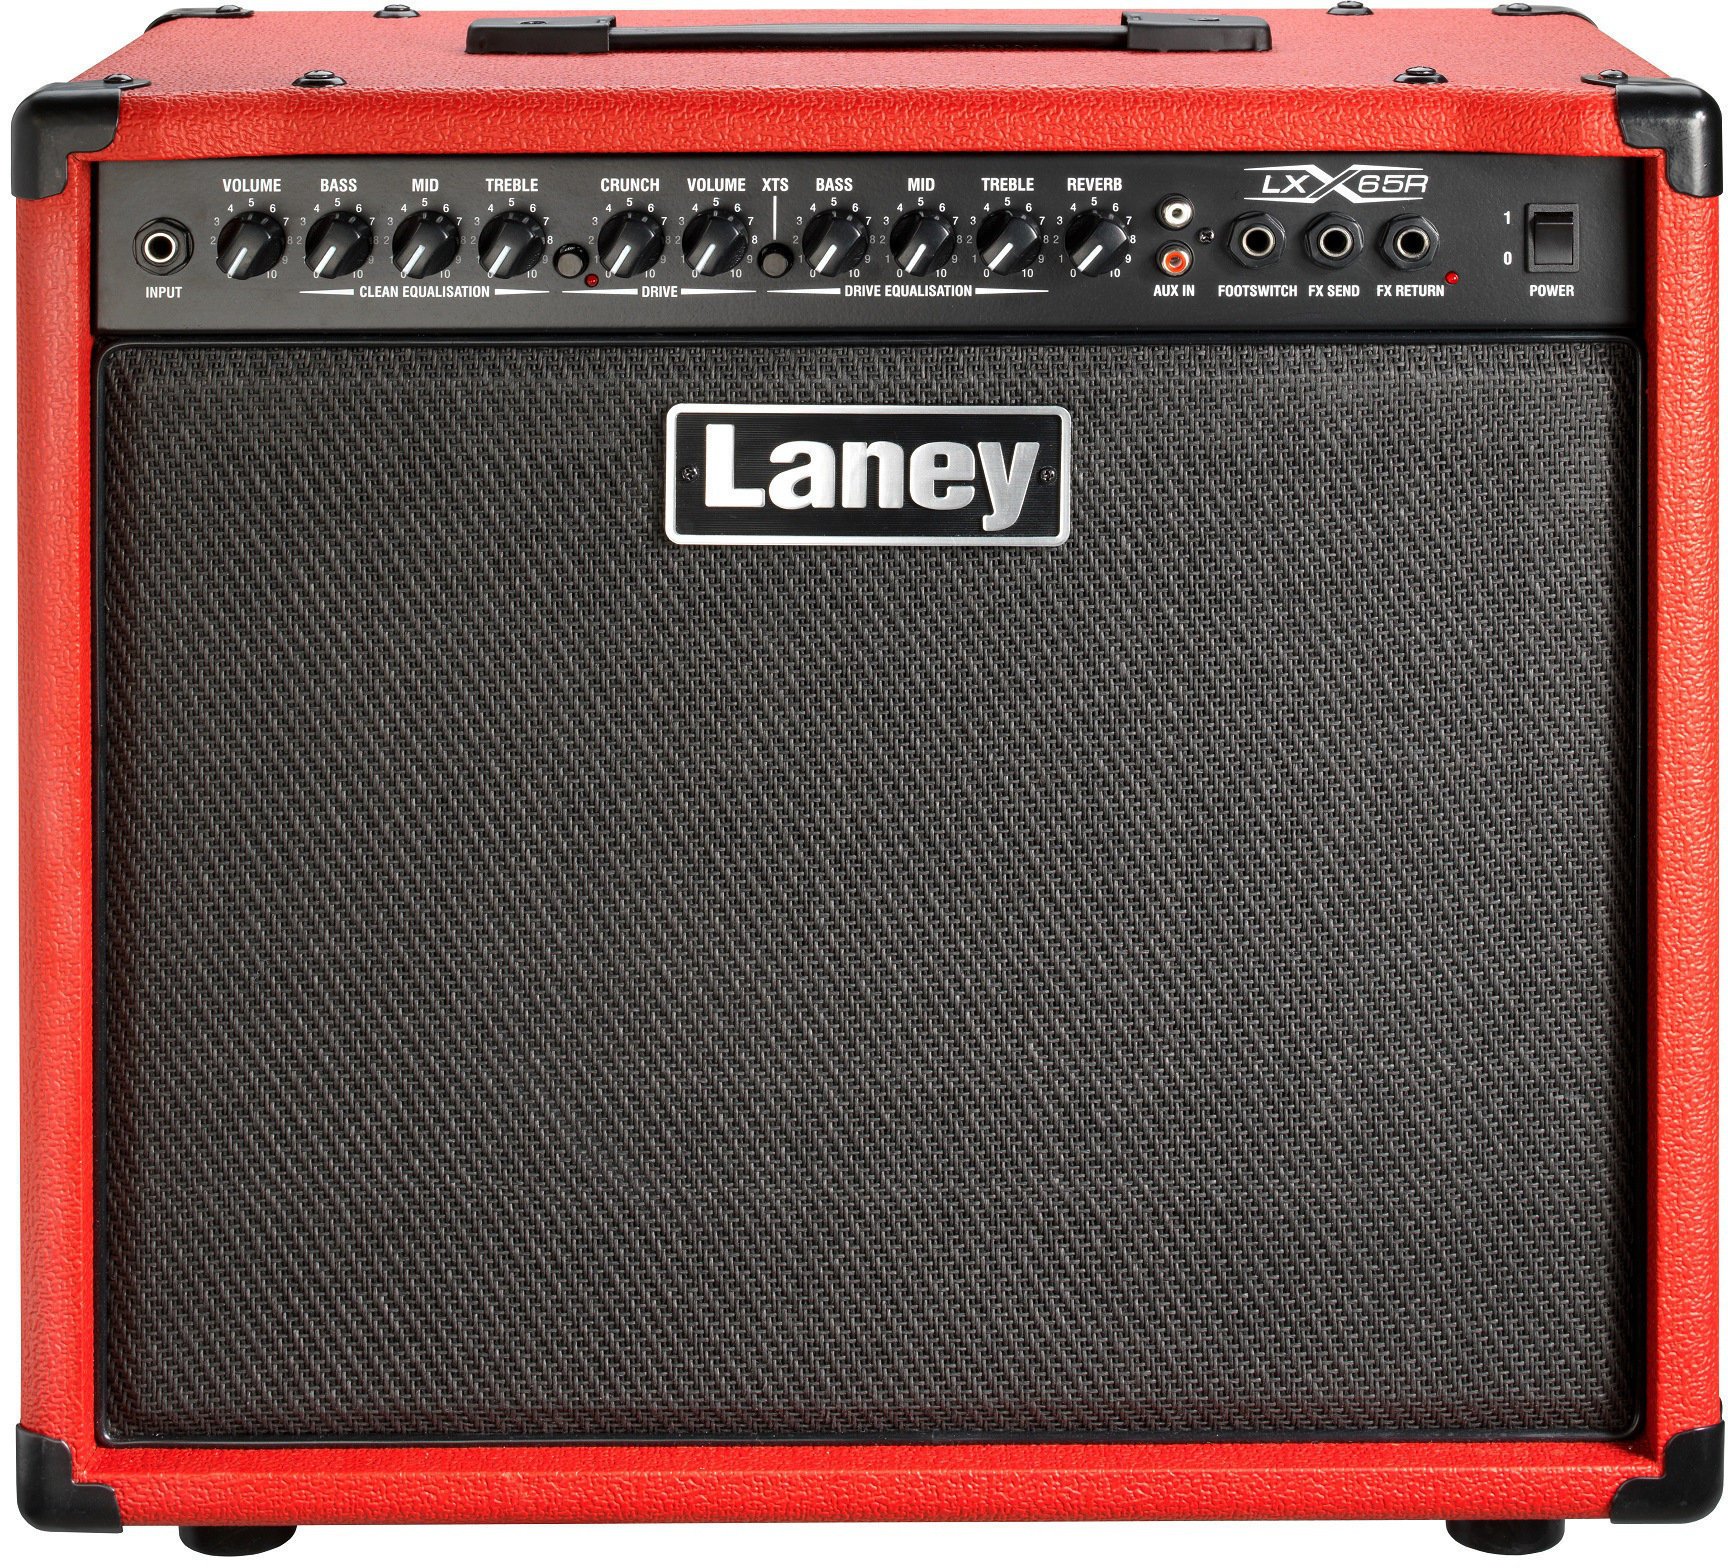 Solid-State Combo Laney LX65R RD